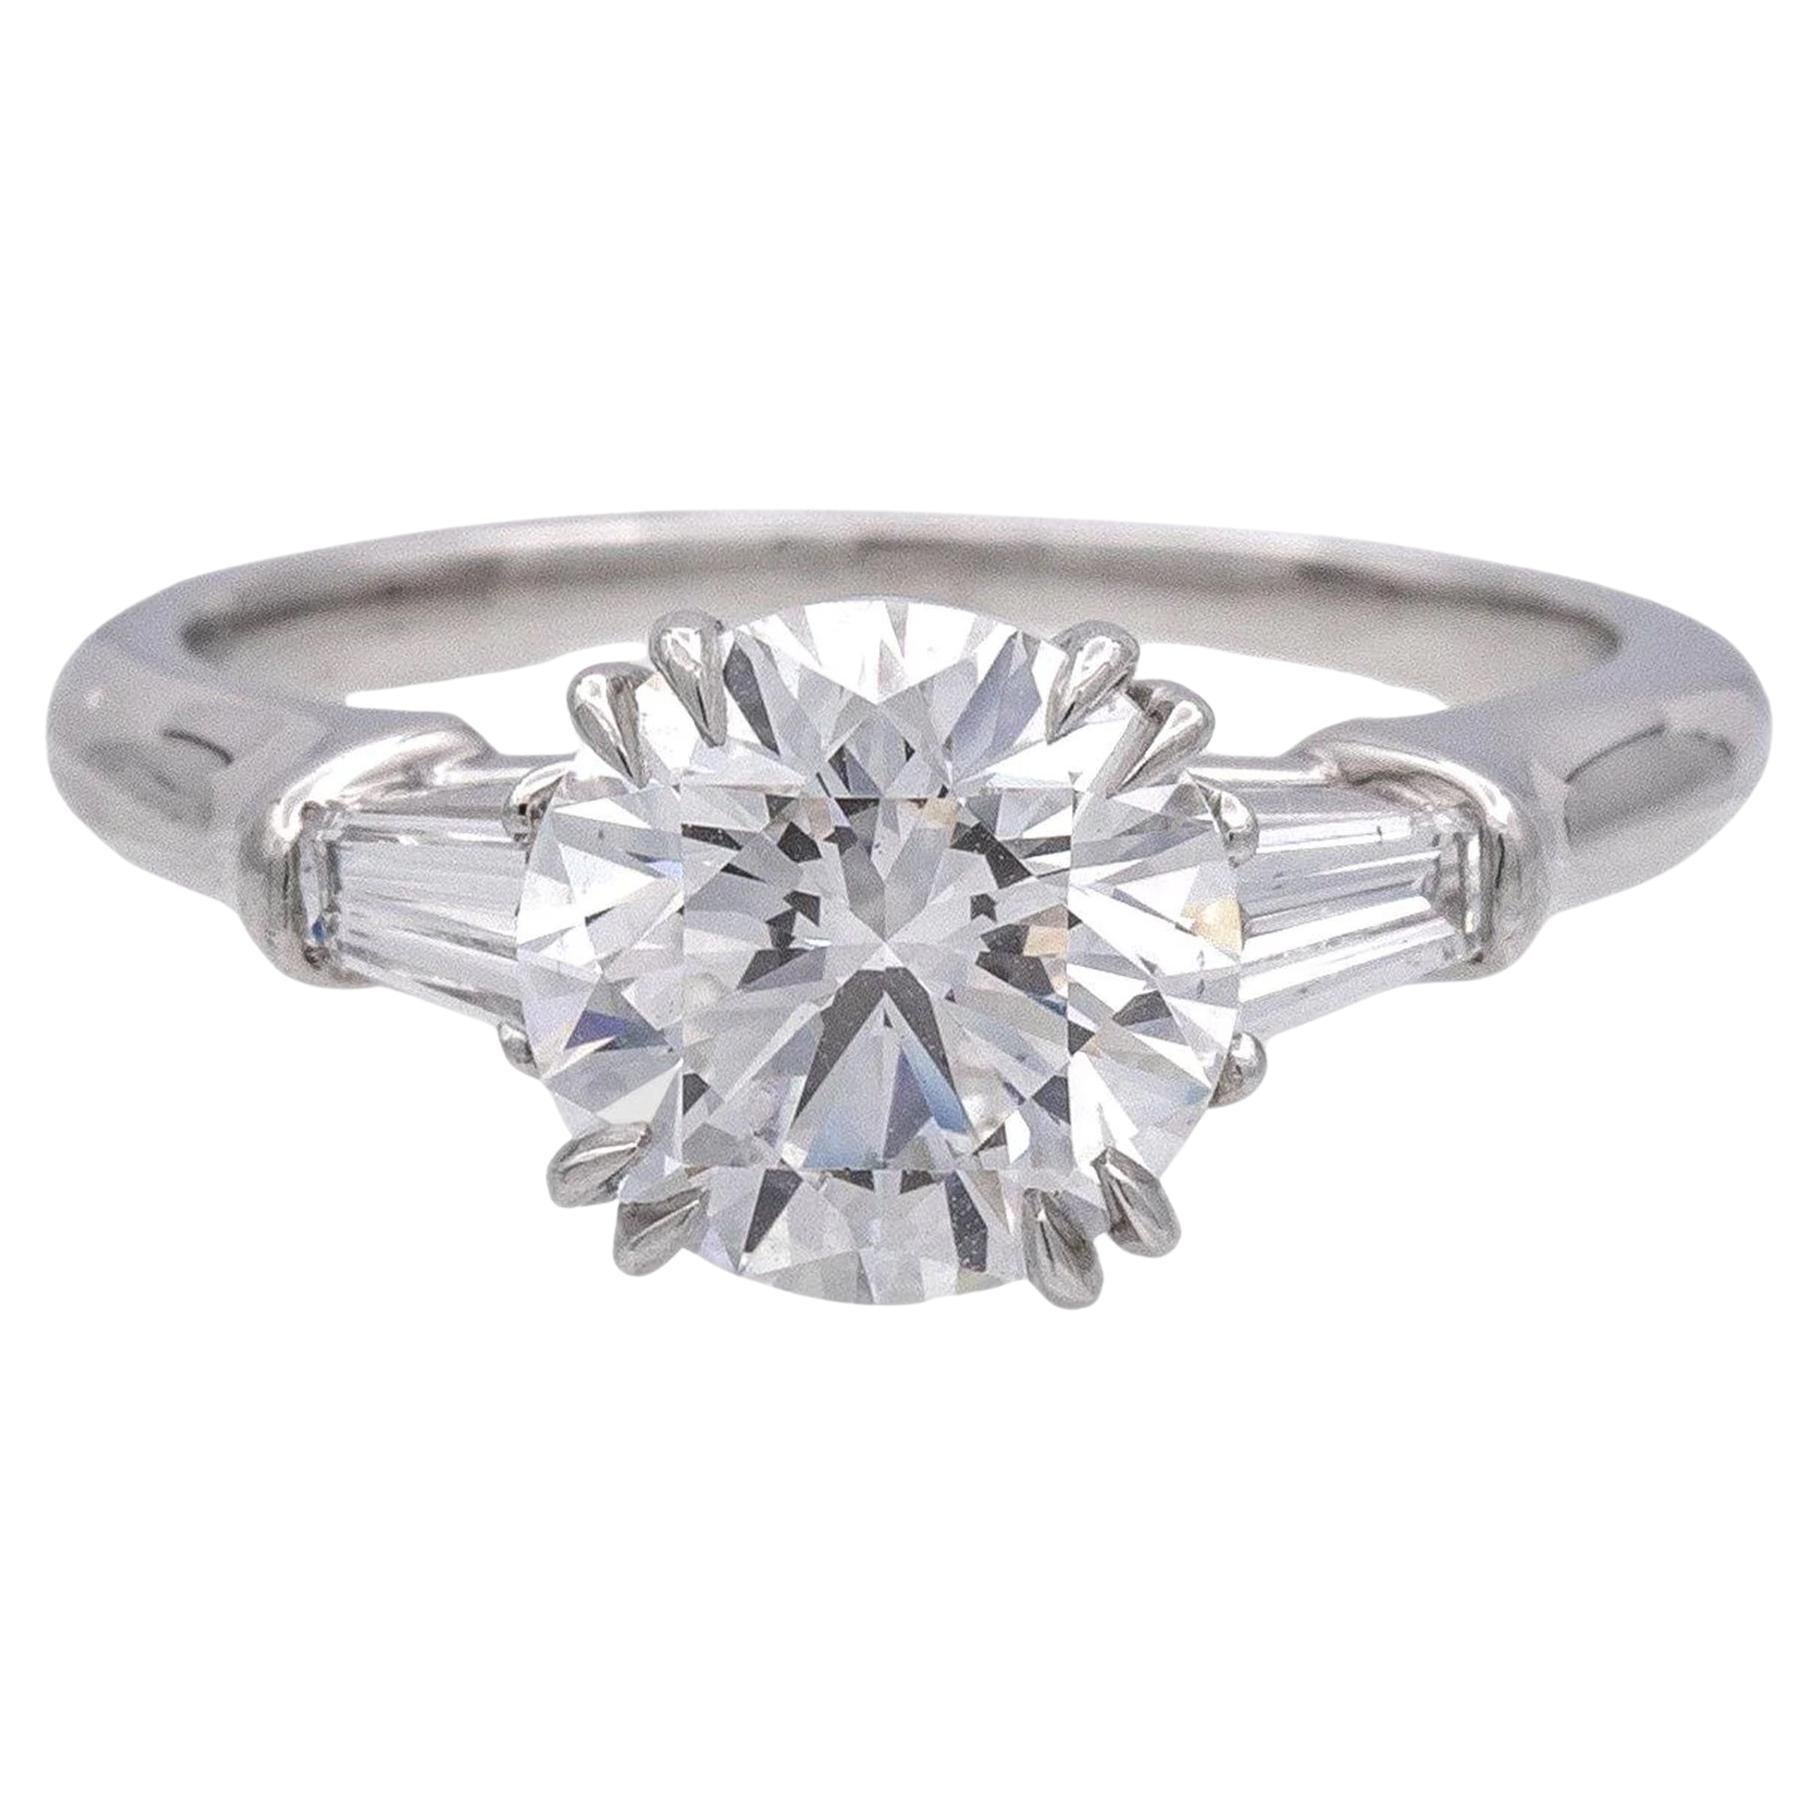 A breathtakingly beautiful diamond ring featuring an eye-clean diamond that radiates with exceptional clarity. The diamond is impressively white, boasting a G color grading that contributes to its vibrant sparkle. 

The design is elegant and